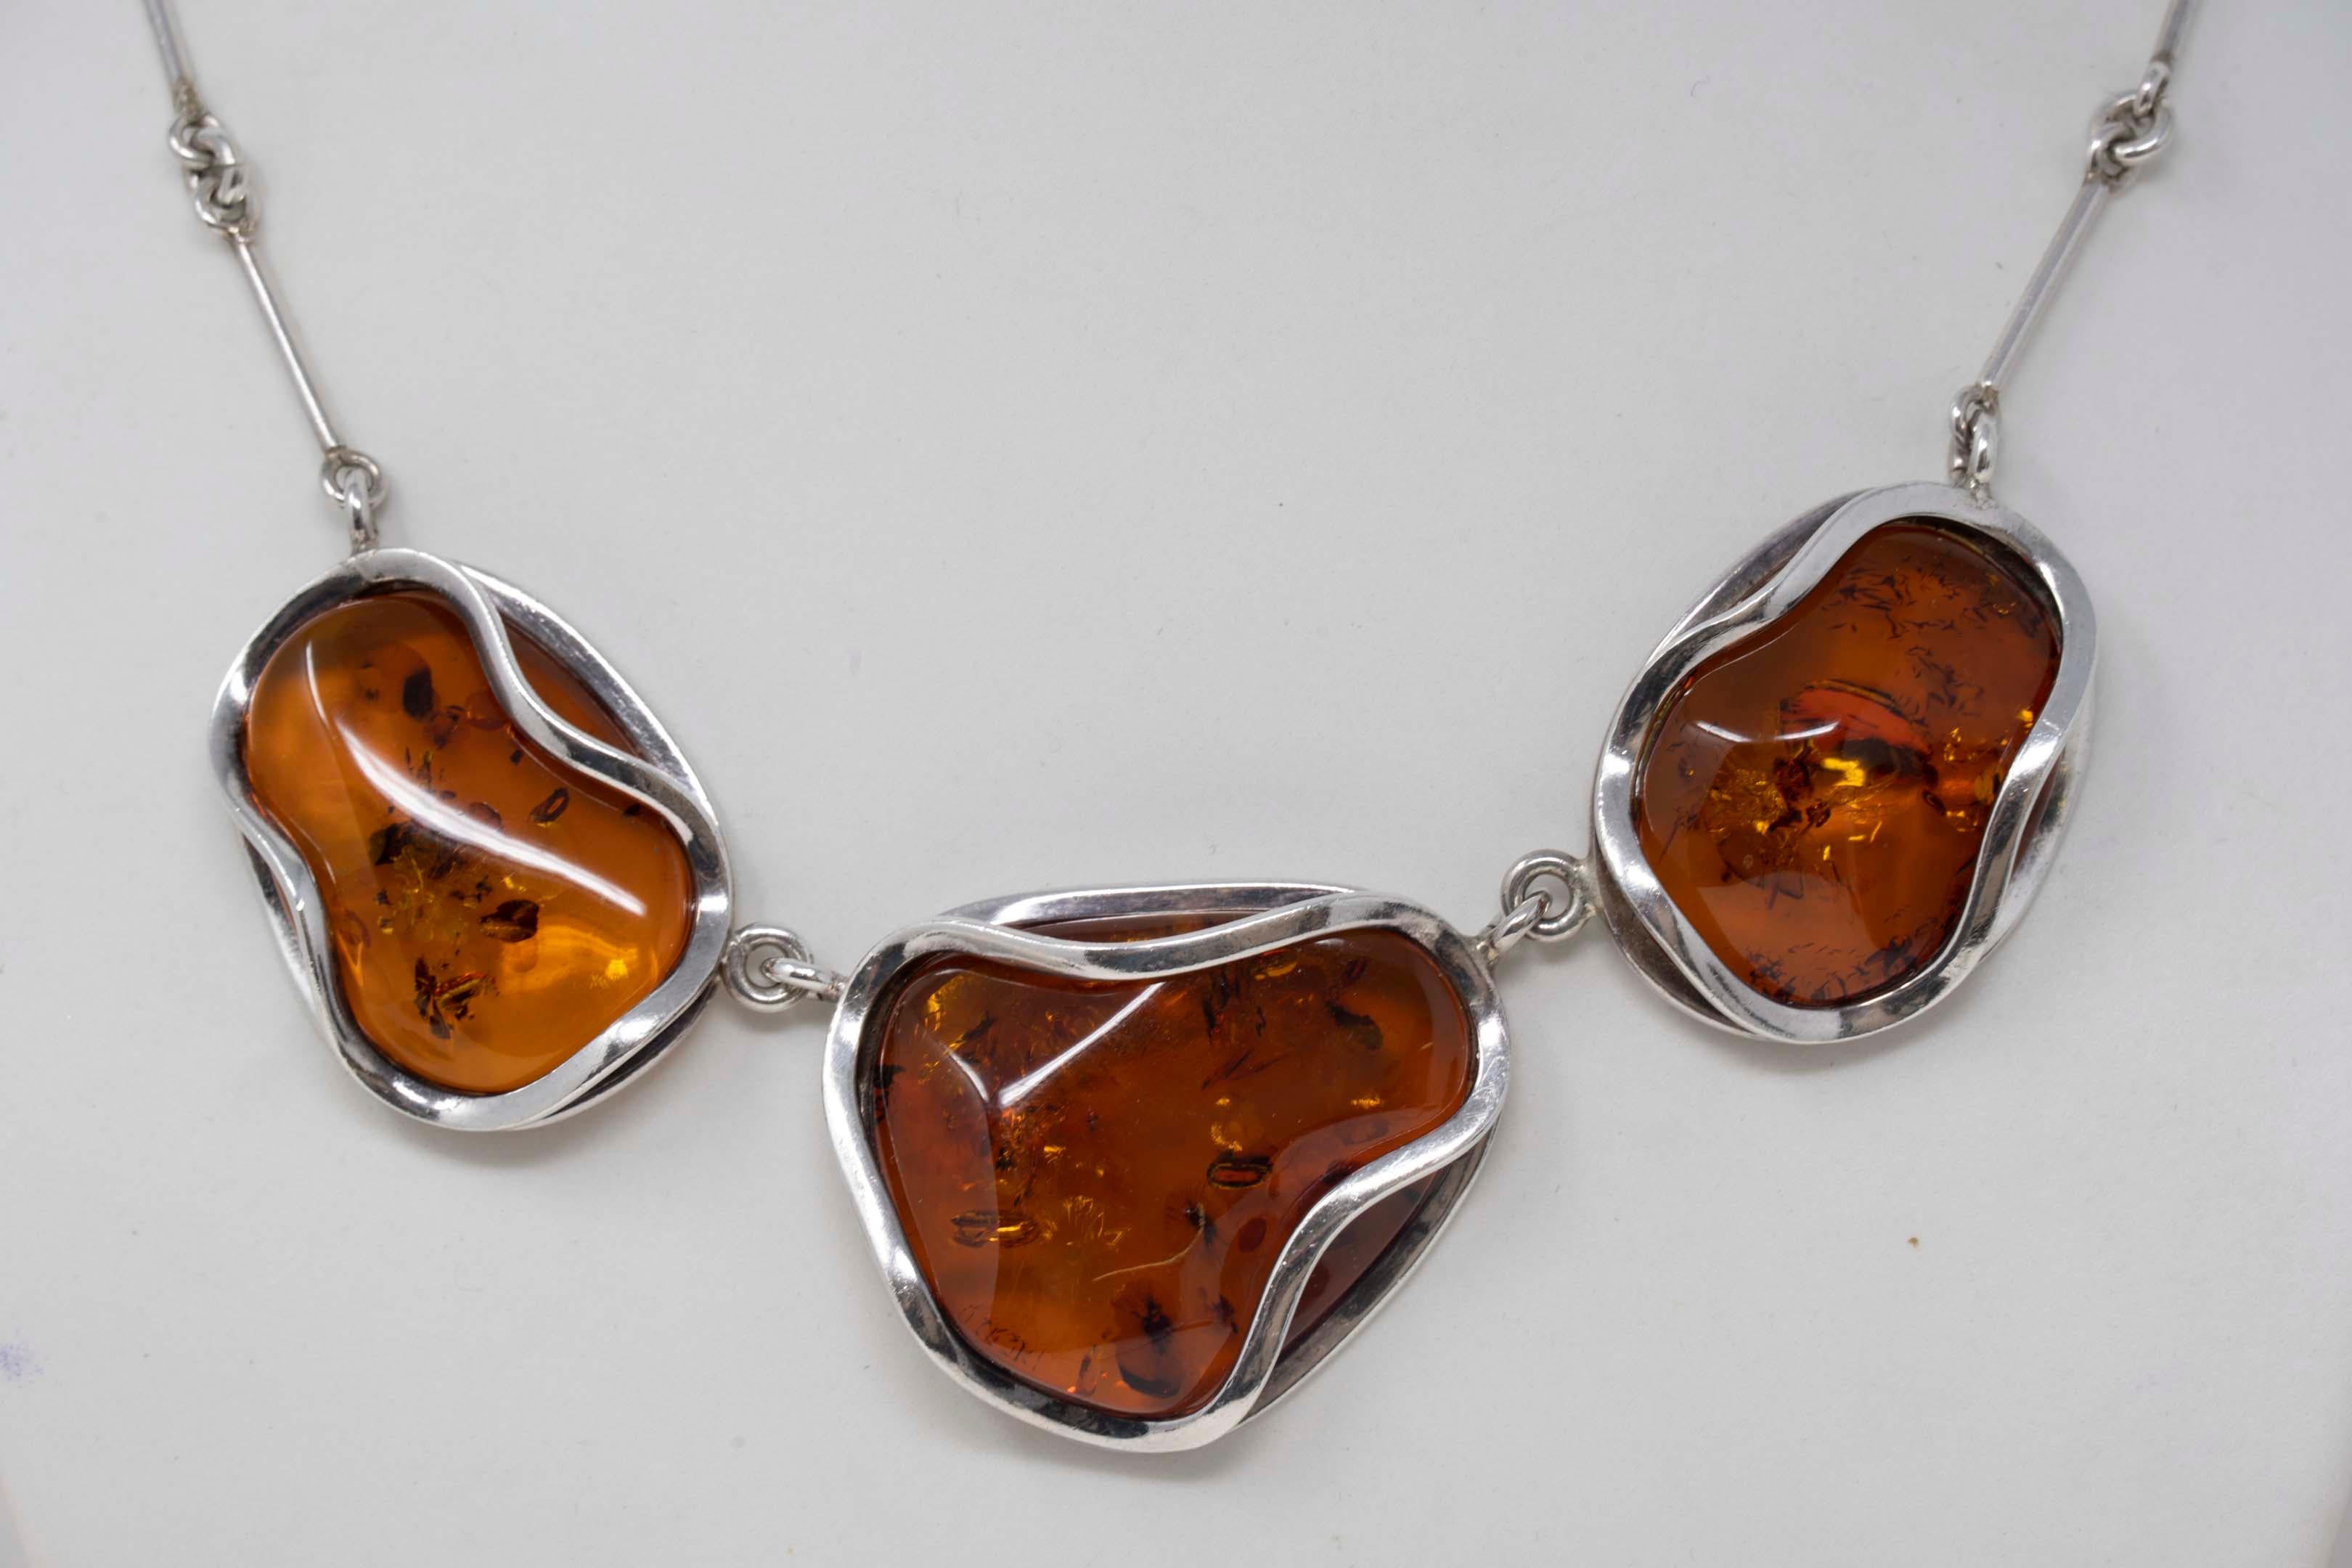 Vintage Baltic amber necklace 925 silver with three handmade pendant chain. Measures 20 inches long, the central amber pendant measures 34mm x 41 mm, 20th century. In good condition.

